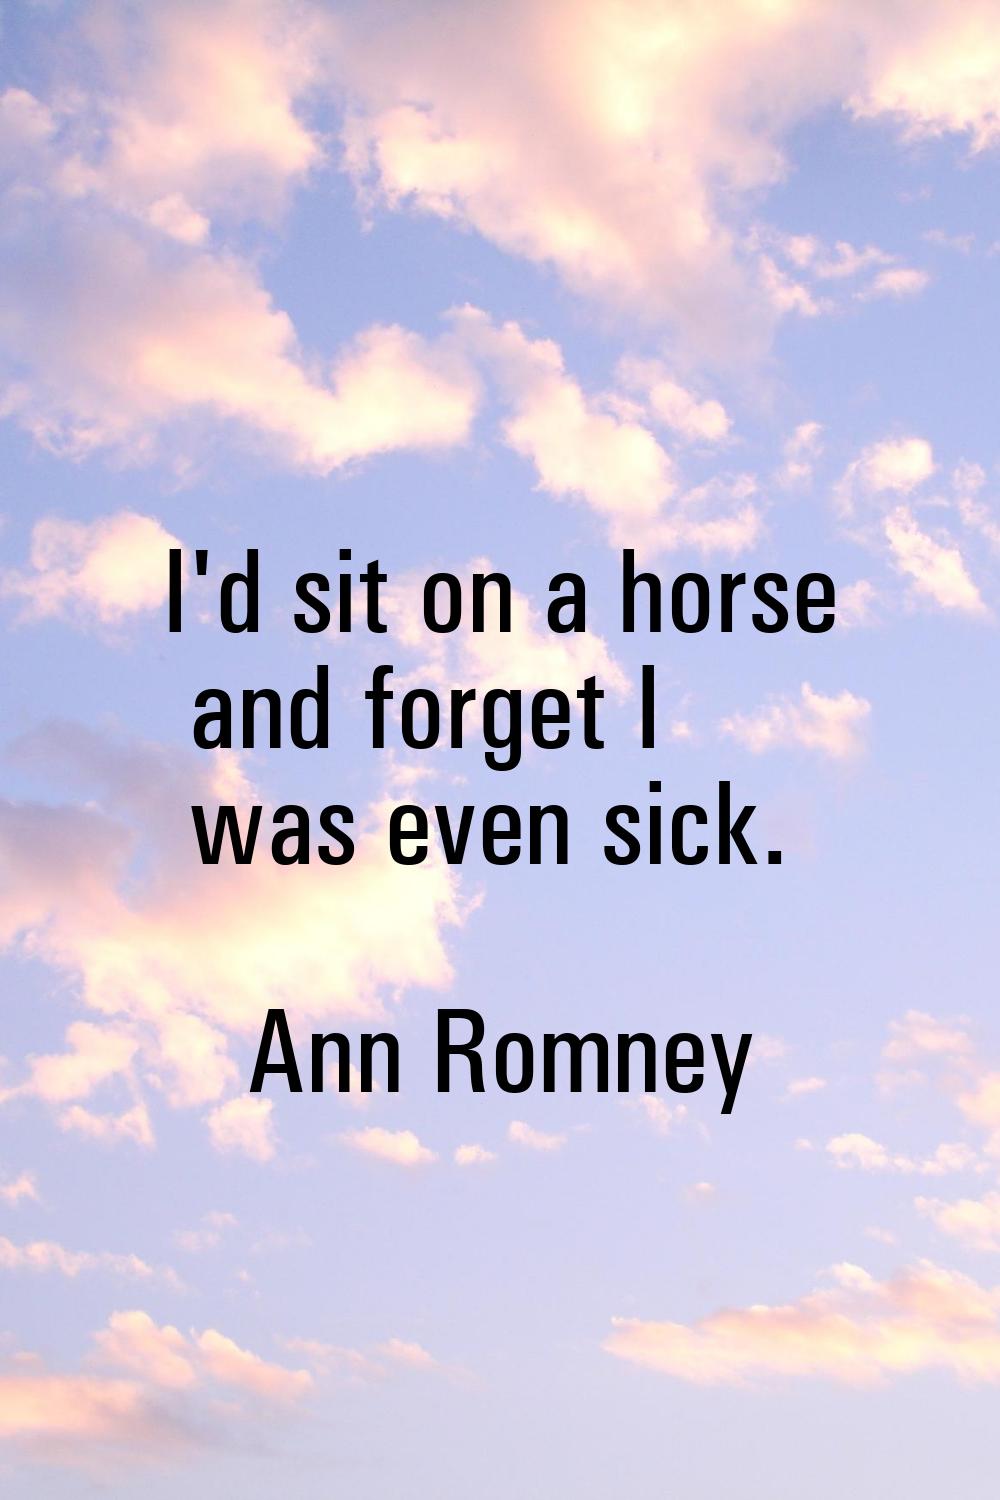 I'd sit on a horse and forget I was even sick.